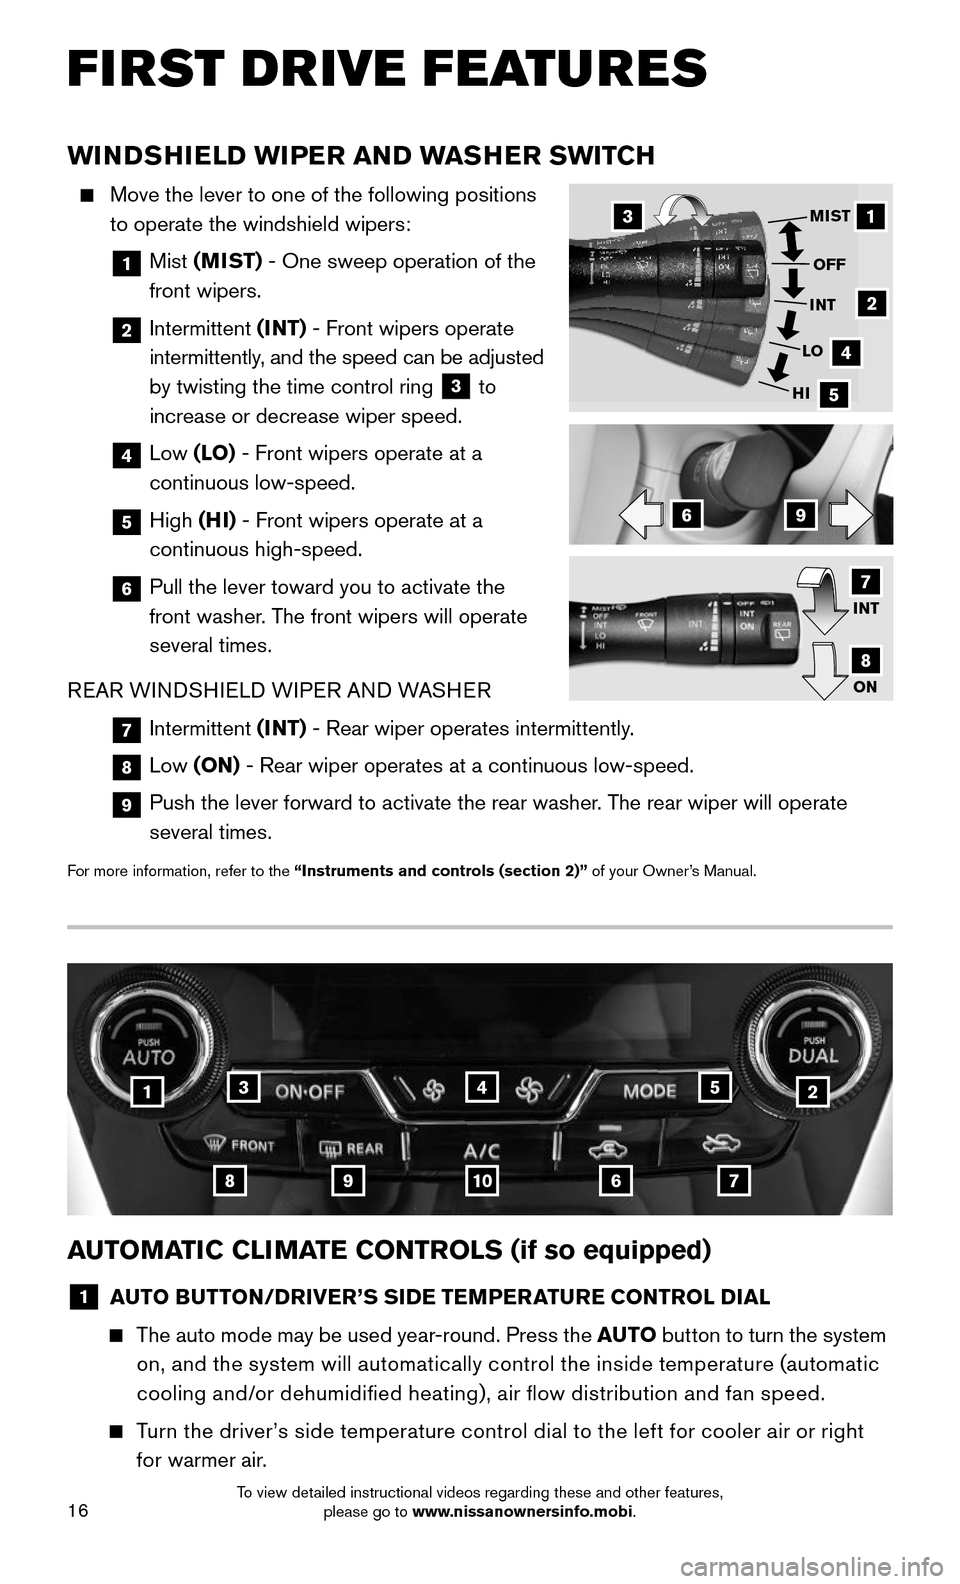 NISSAN MURANO 2015 3.G Quick Reference Guide 16
FIRST DRIVE FEATURES
WINDSHIELD WIPER AND WASHER SWITCH
    Move the lever to one of the following positions 
to operate the windshield wipers: 
    1  Mist (MIST) - One sweep operation of the  
fr